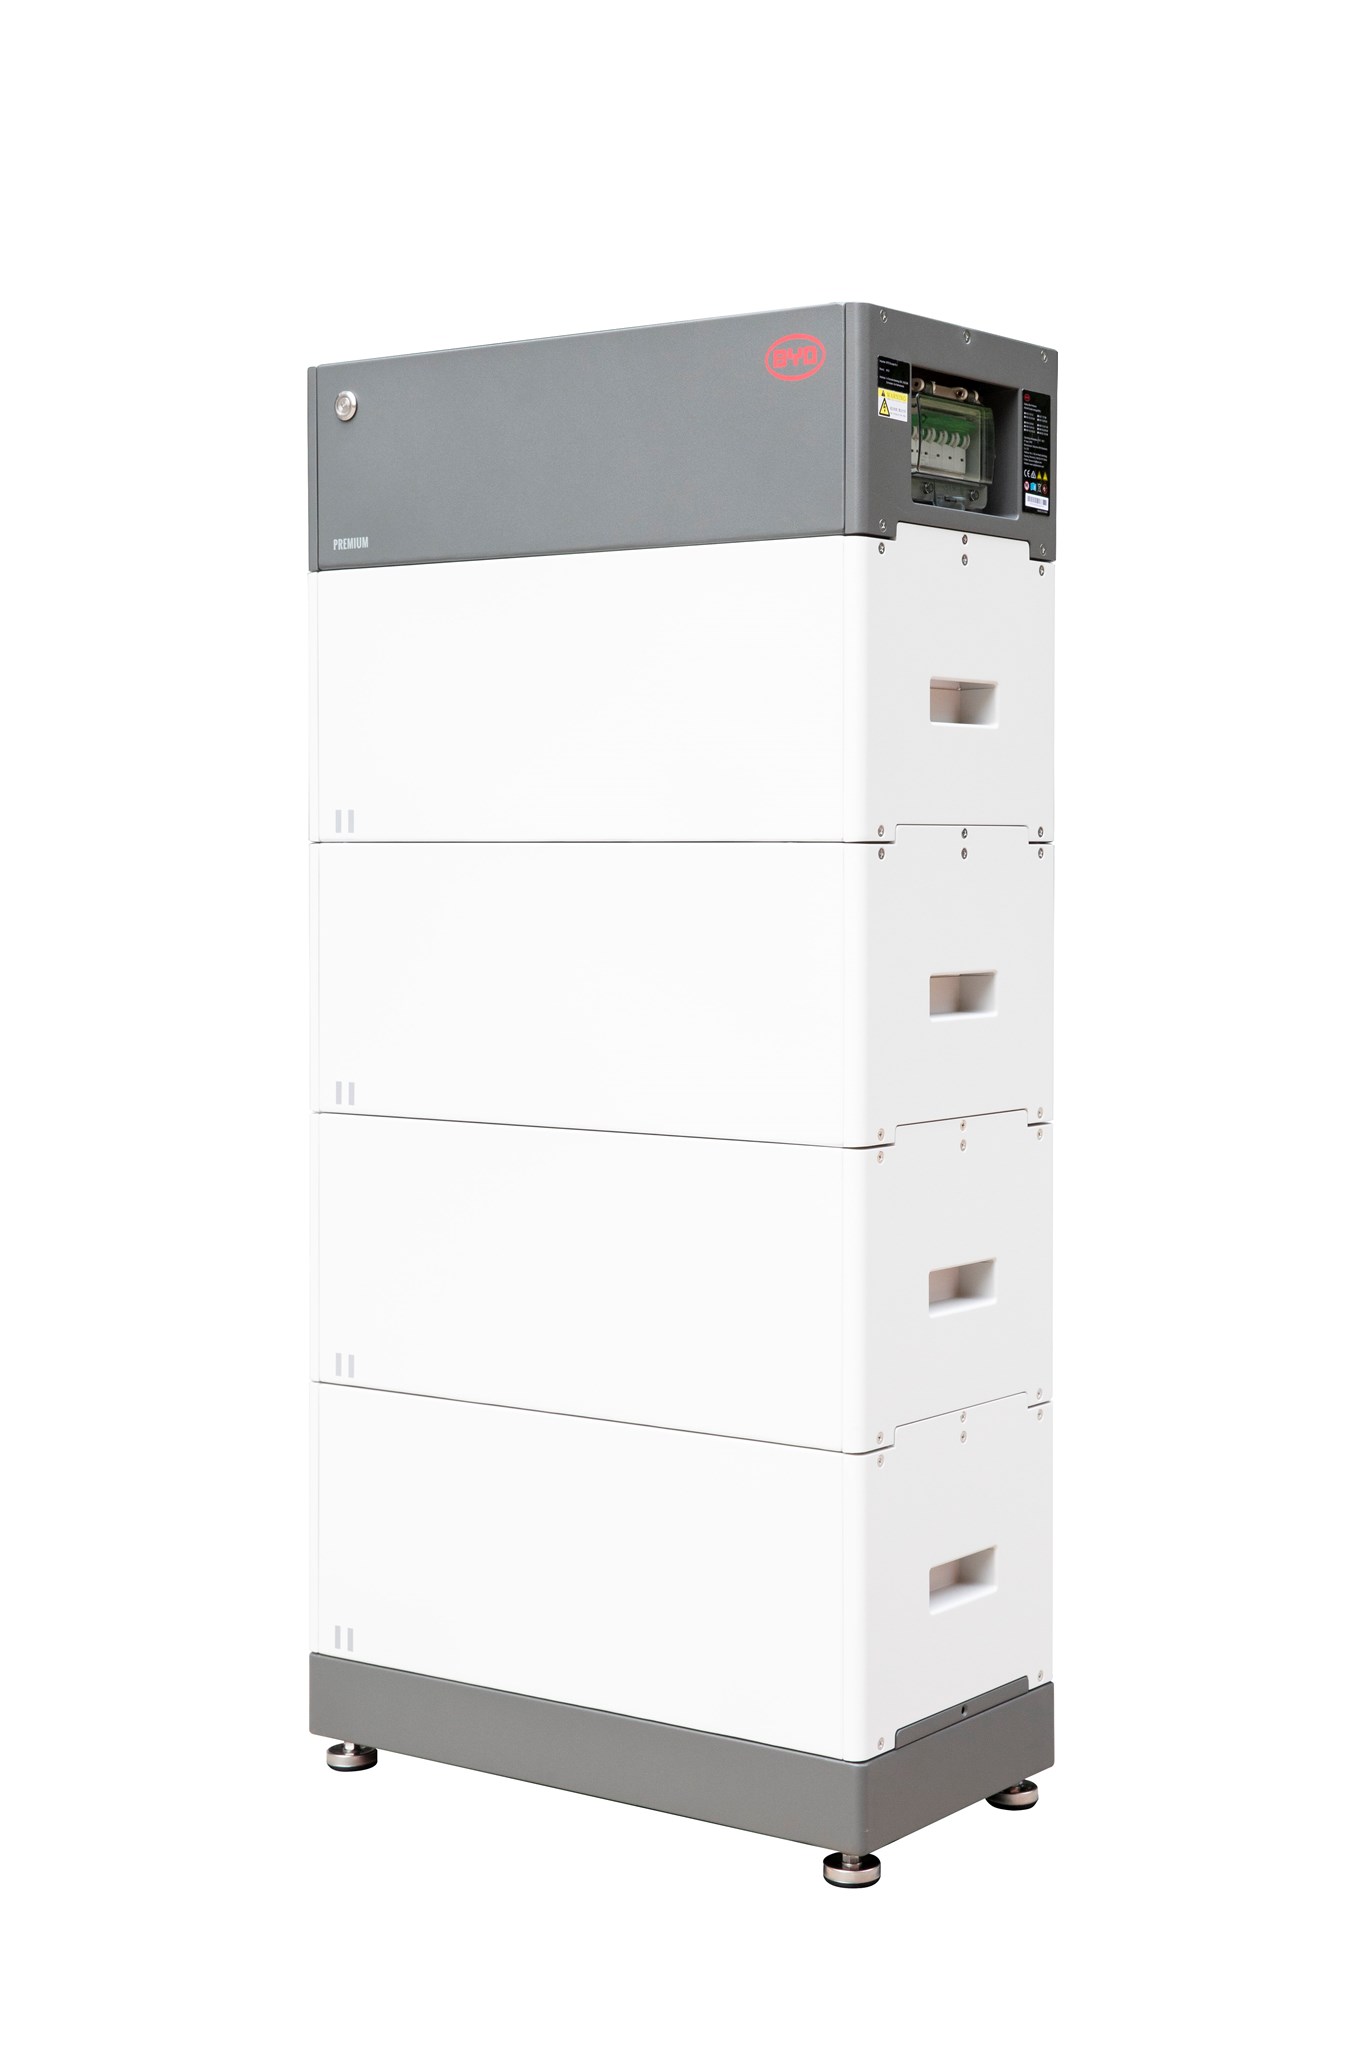 Picture of BYD Battery-Box Premium HVM 11.0 - 11.04 kW 4x 2.76 kW/h (PV battery storage)